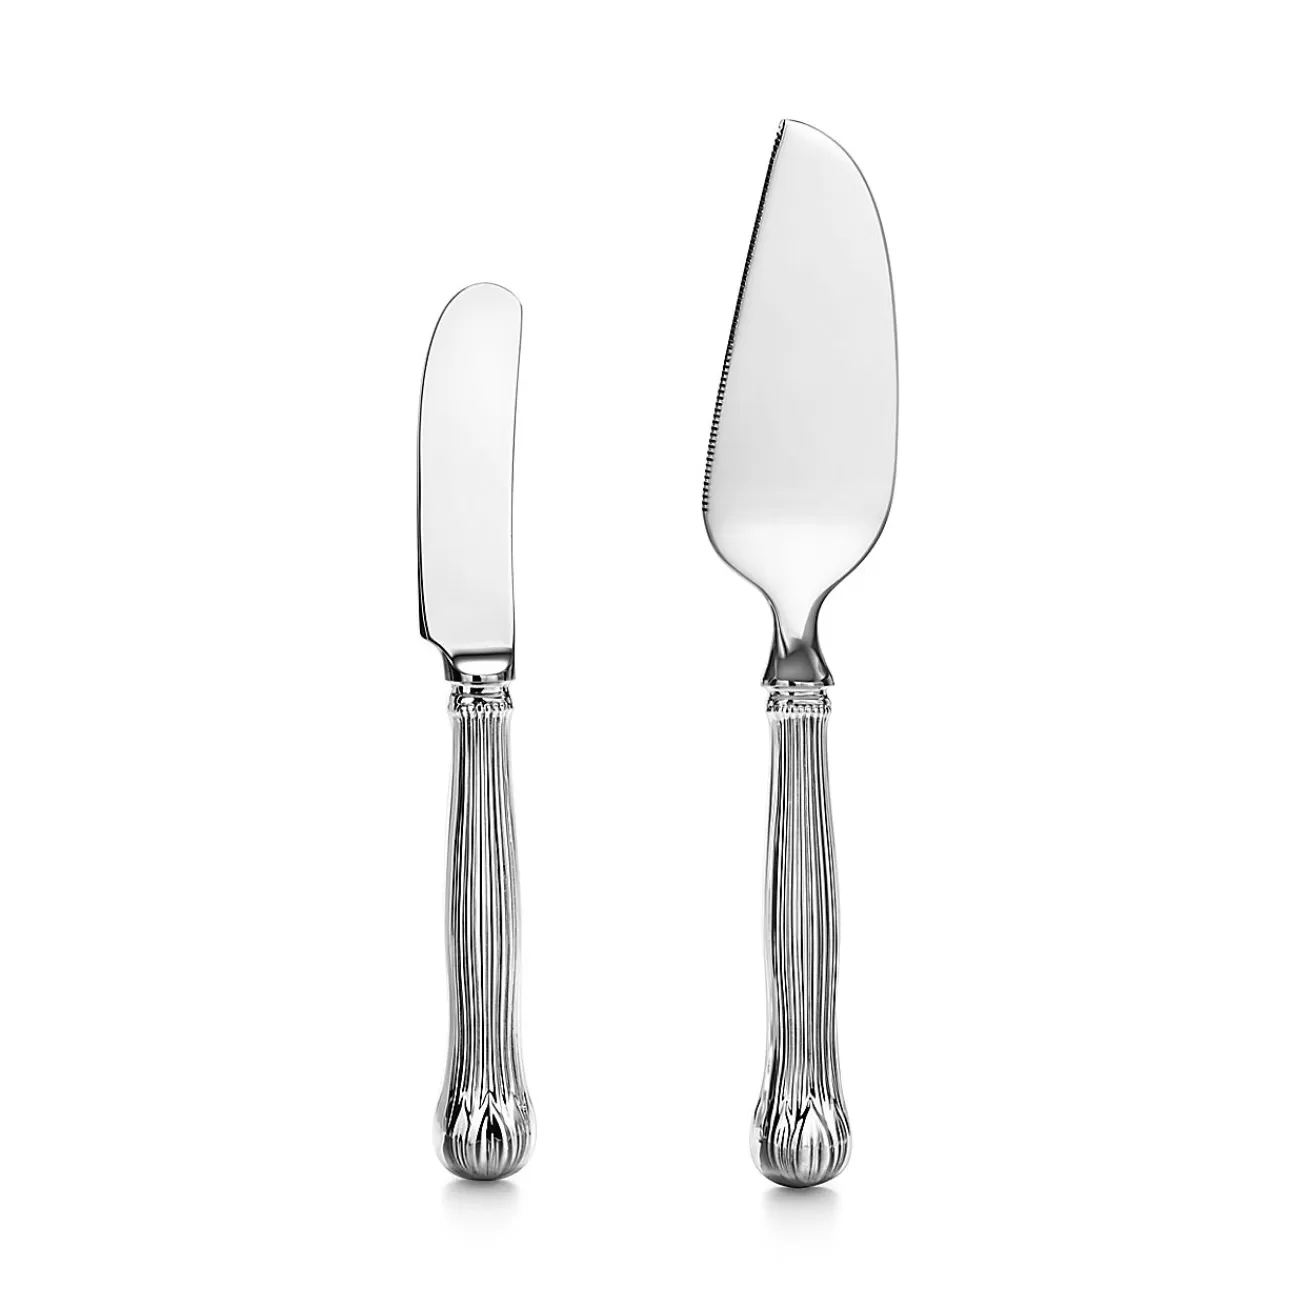 Tiffany & Co. Lotus cheese spreader and server in sterling silver. | ^ The Couple | Wedding Gifts